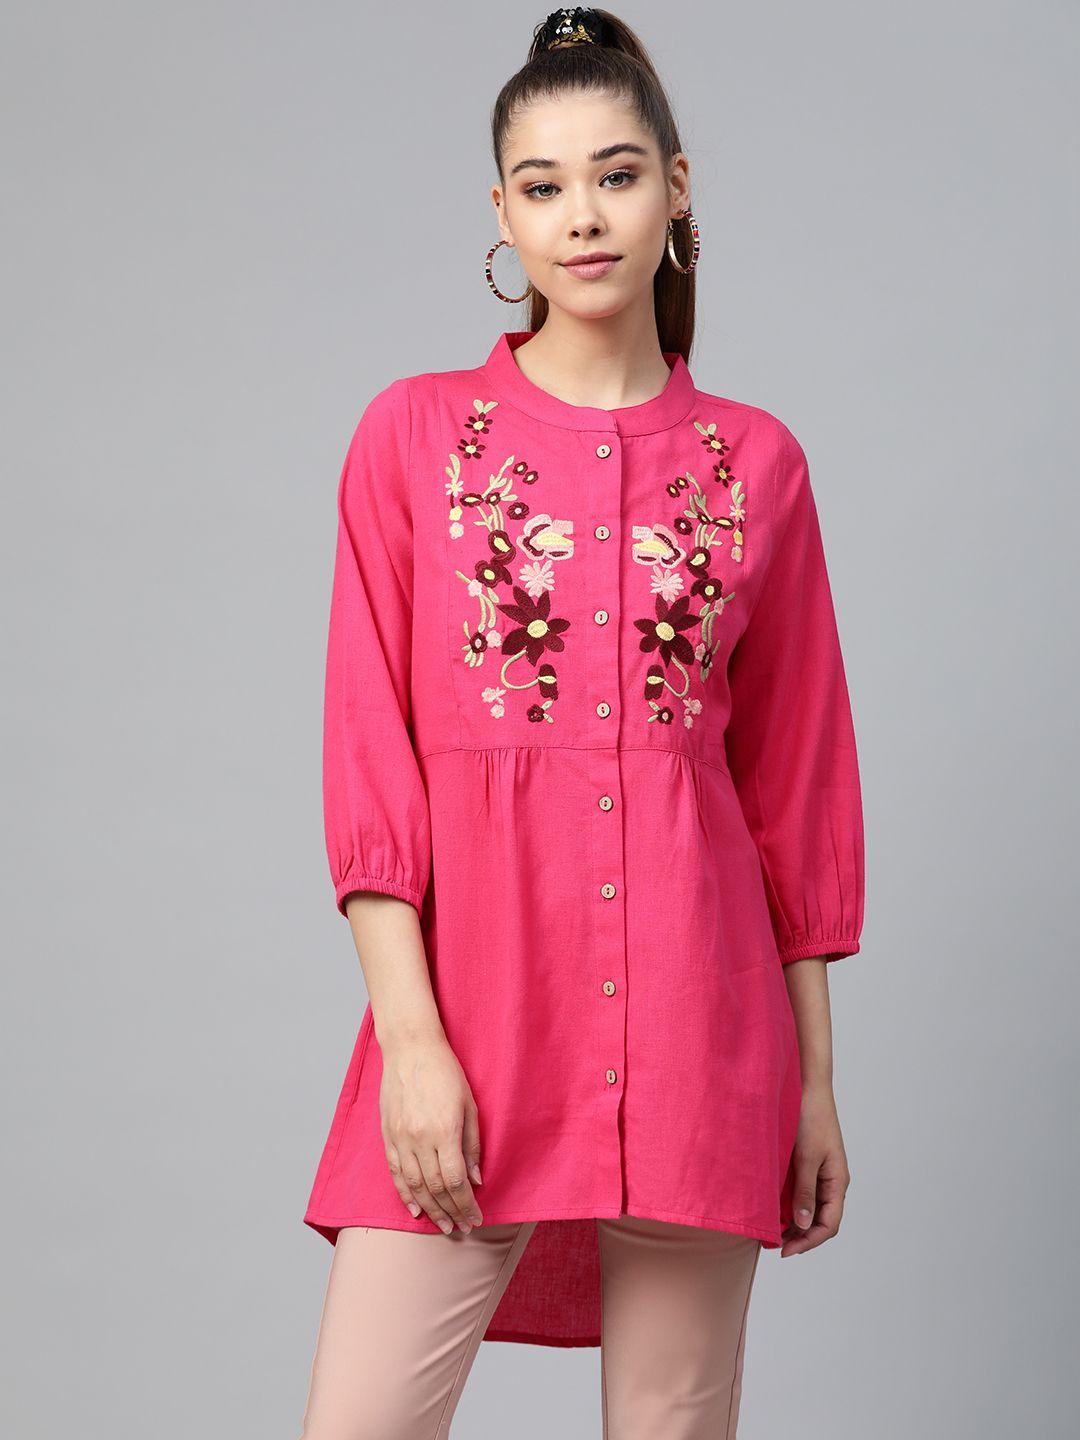 shae-by-sassafras-women-pink-embroidered-high-low-tunic